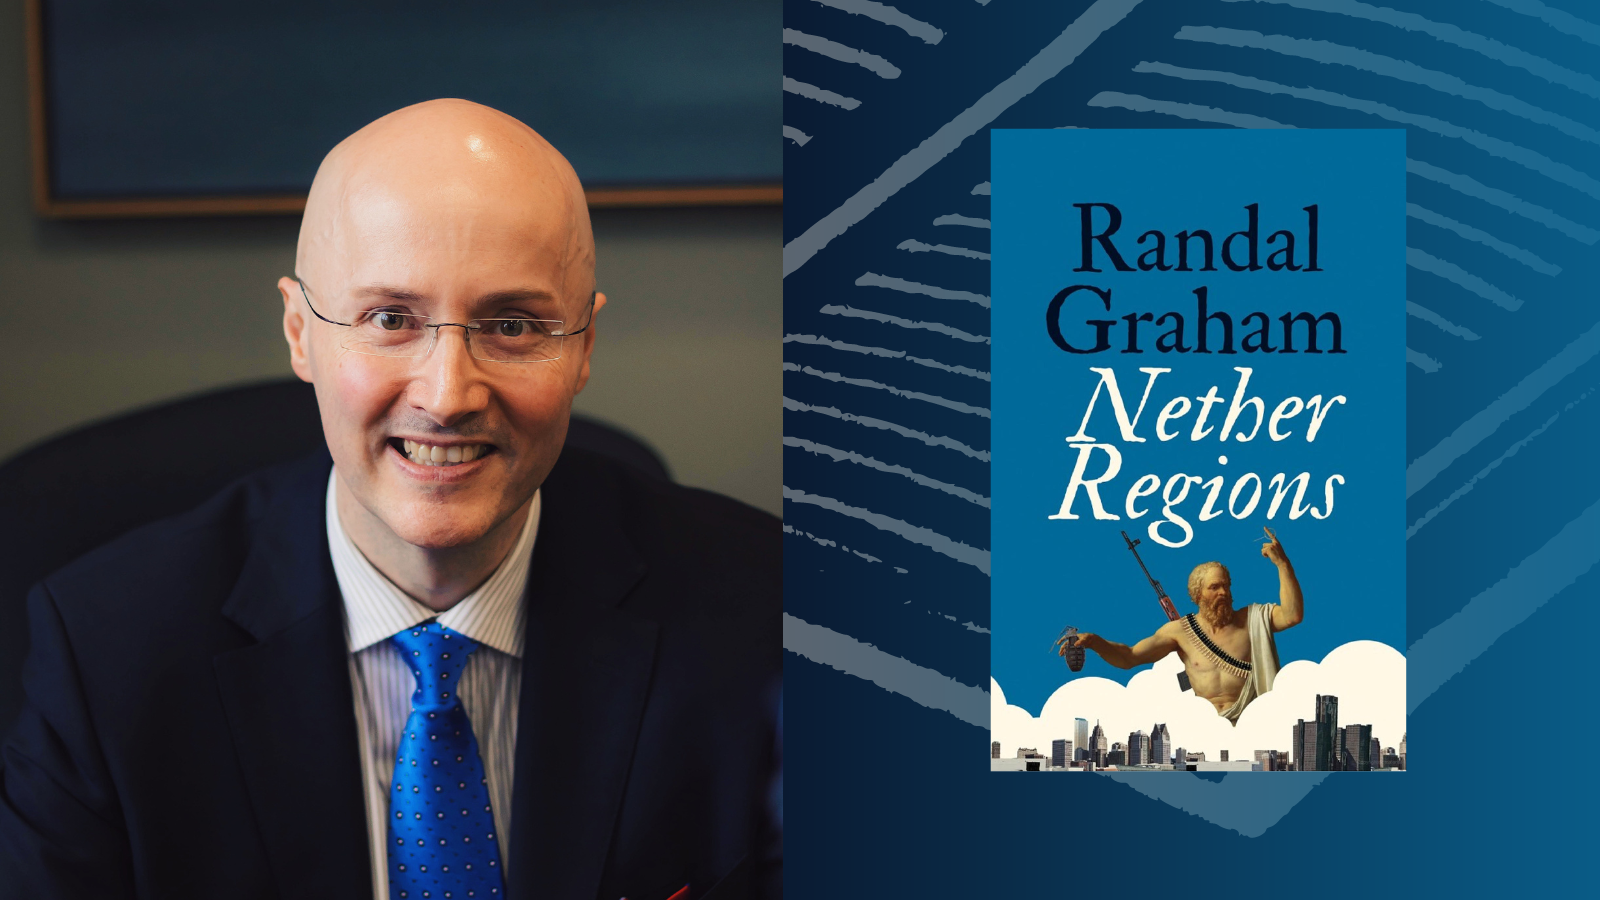 Prof. Randal Graham alongside a photo of the cover of his novel Nether Regions